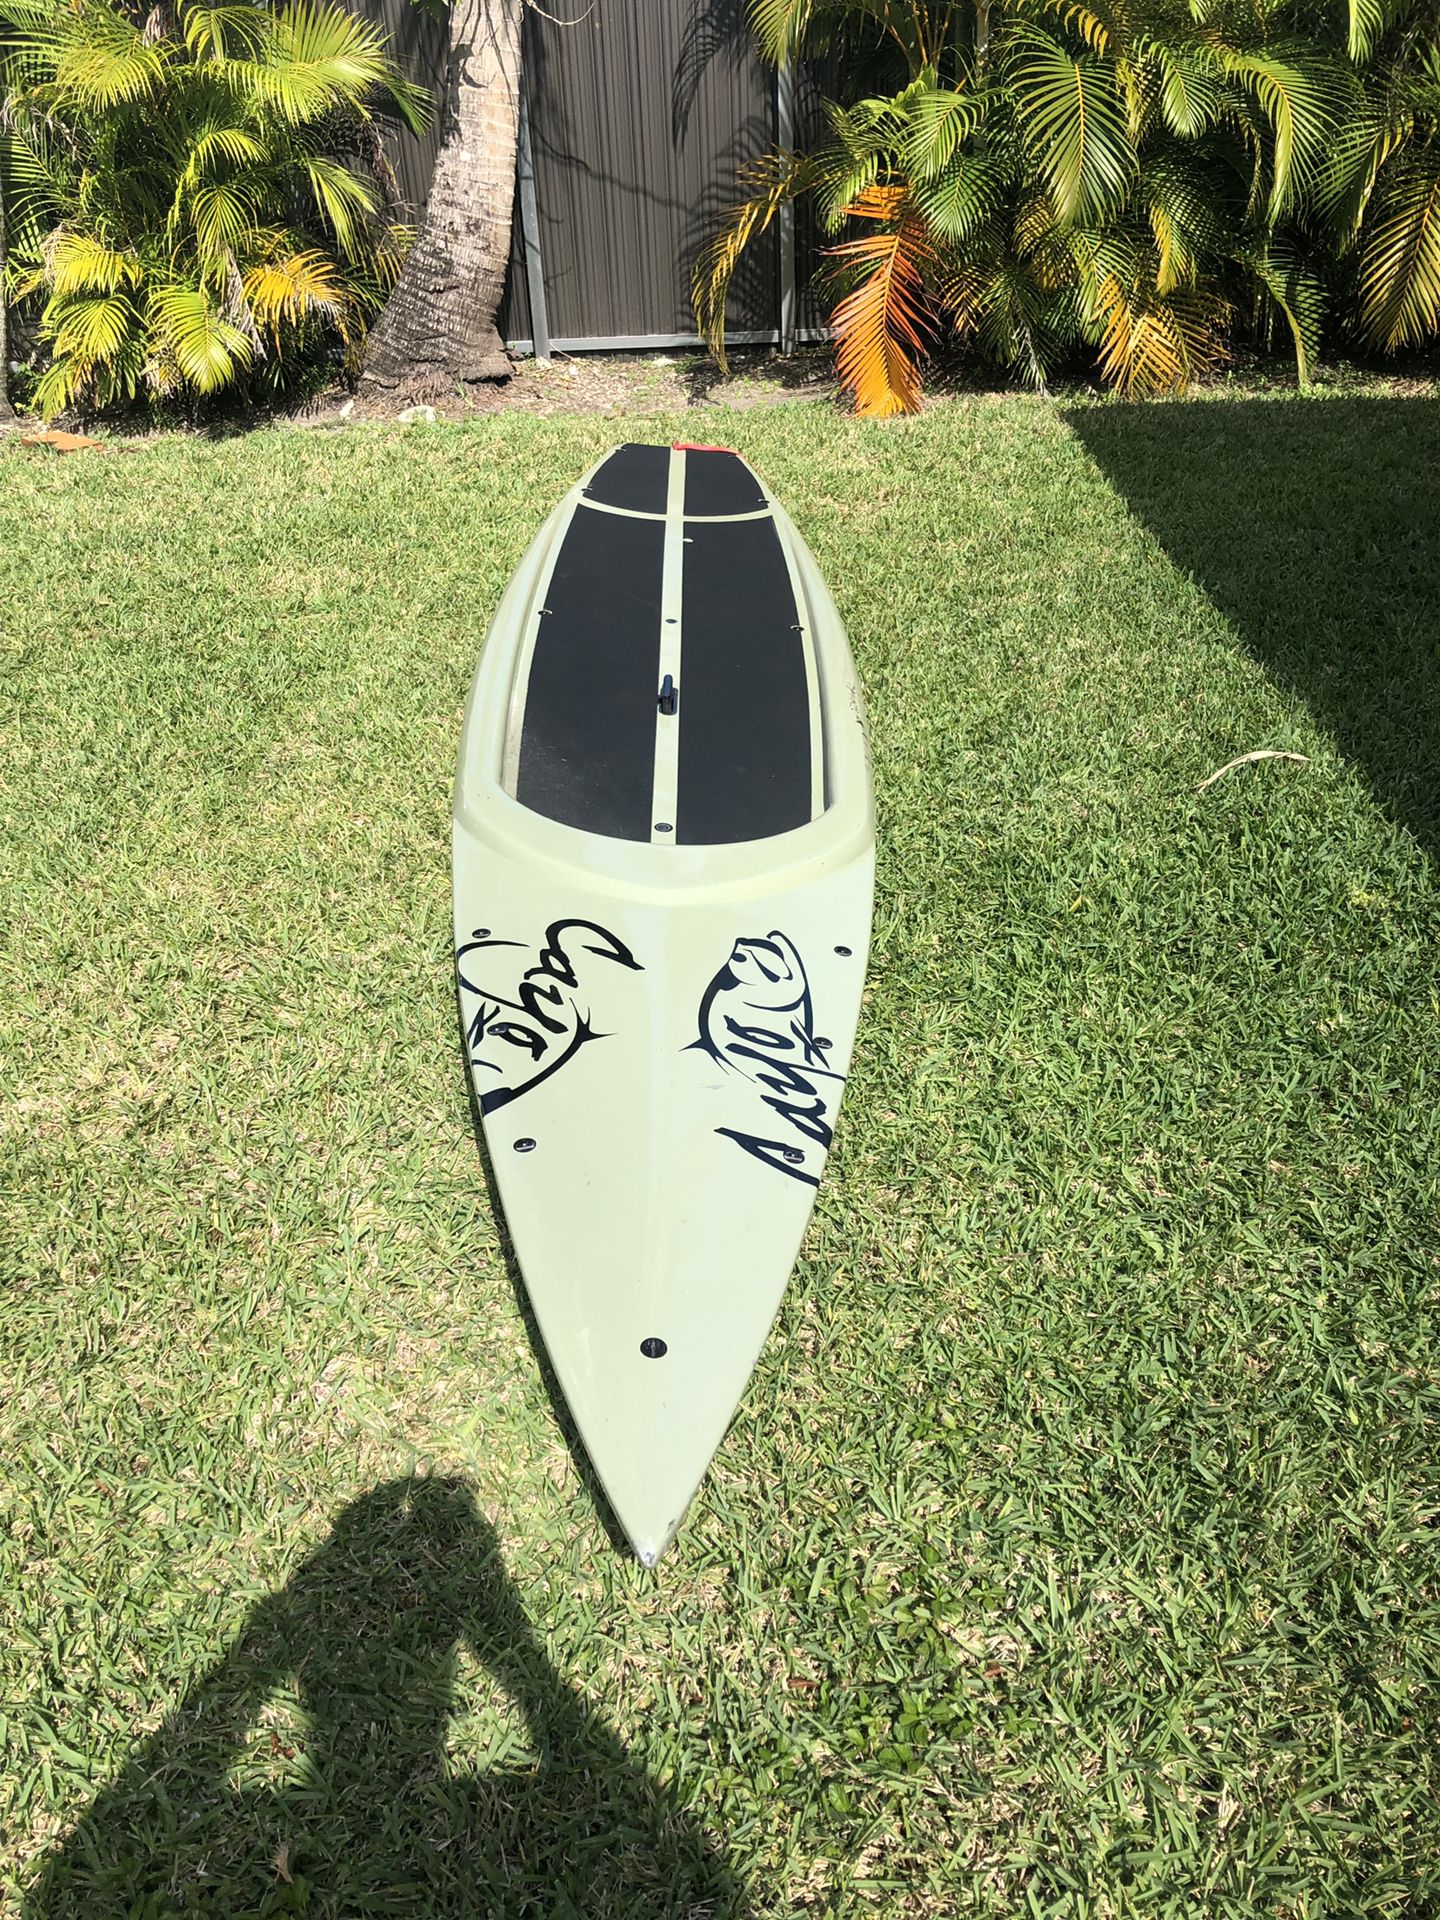 Paddle board - Cayo SUP 138 CUSTOM with paddle, anchor, and trailer hitch extender included!